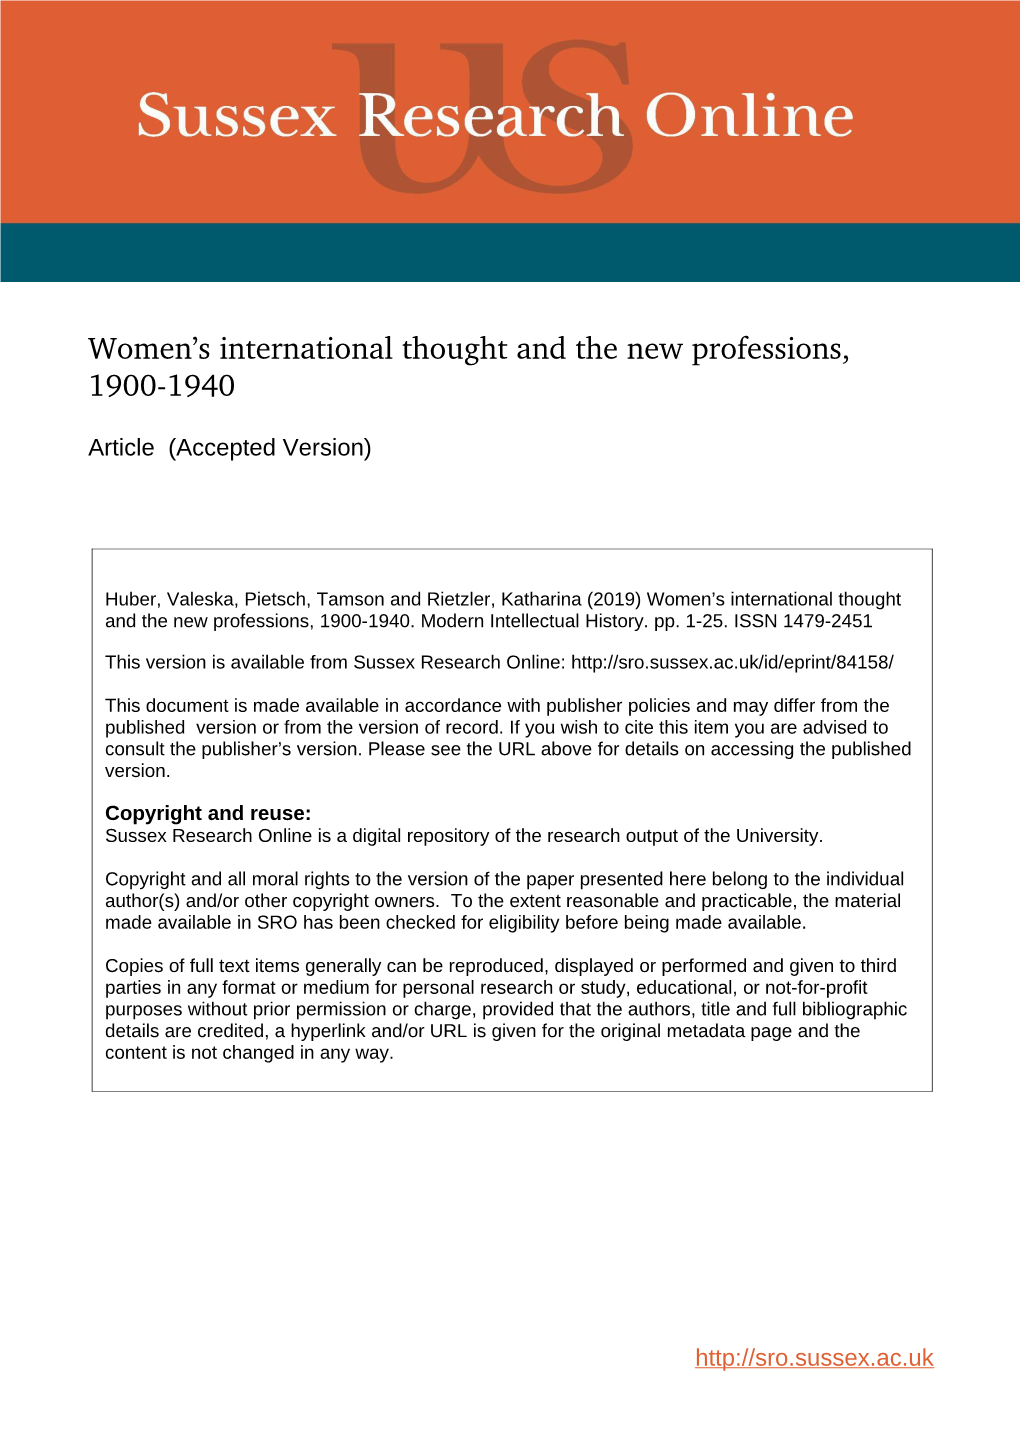 Women's International Thought and the New Professions, 19001940